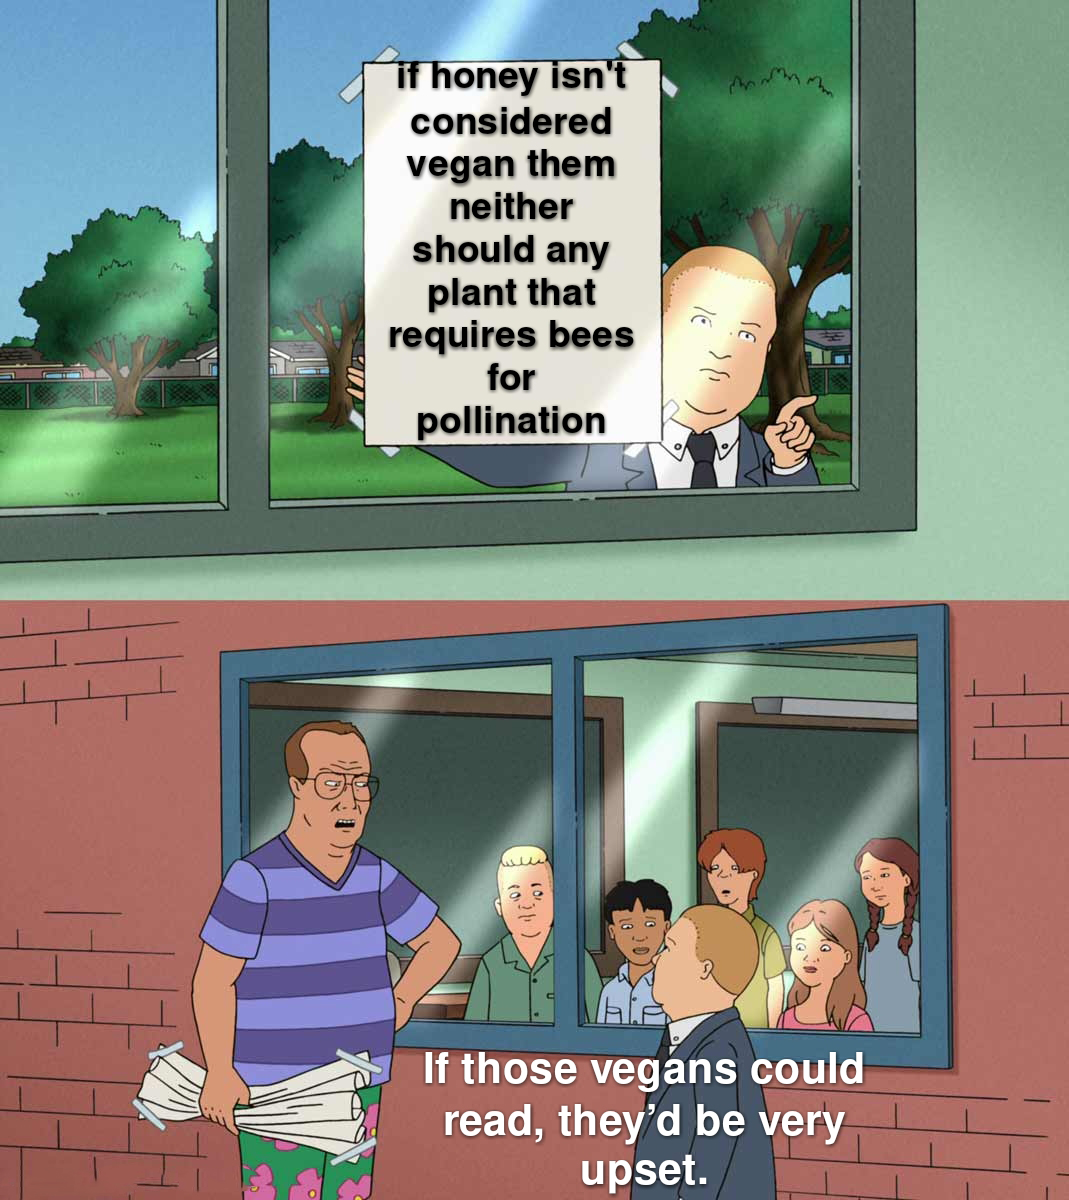 dank memes - those kids could read they d - If honey isn't considered vegan them neither should any plant that requires bees for pollination If those vegans could read, they'd be very upset.